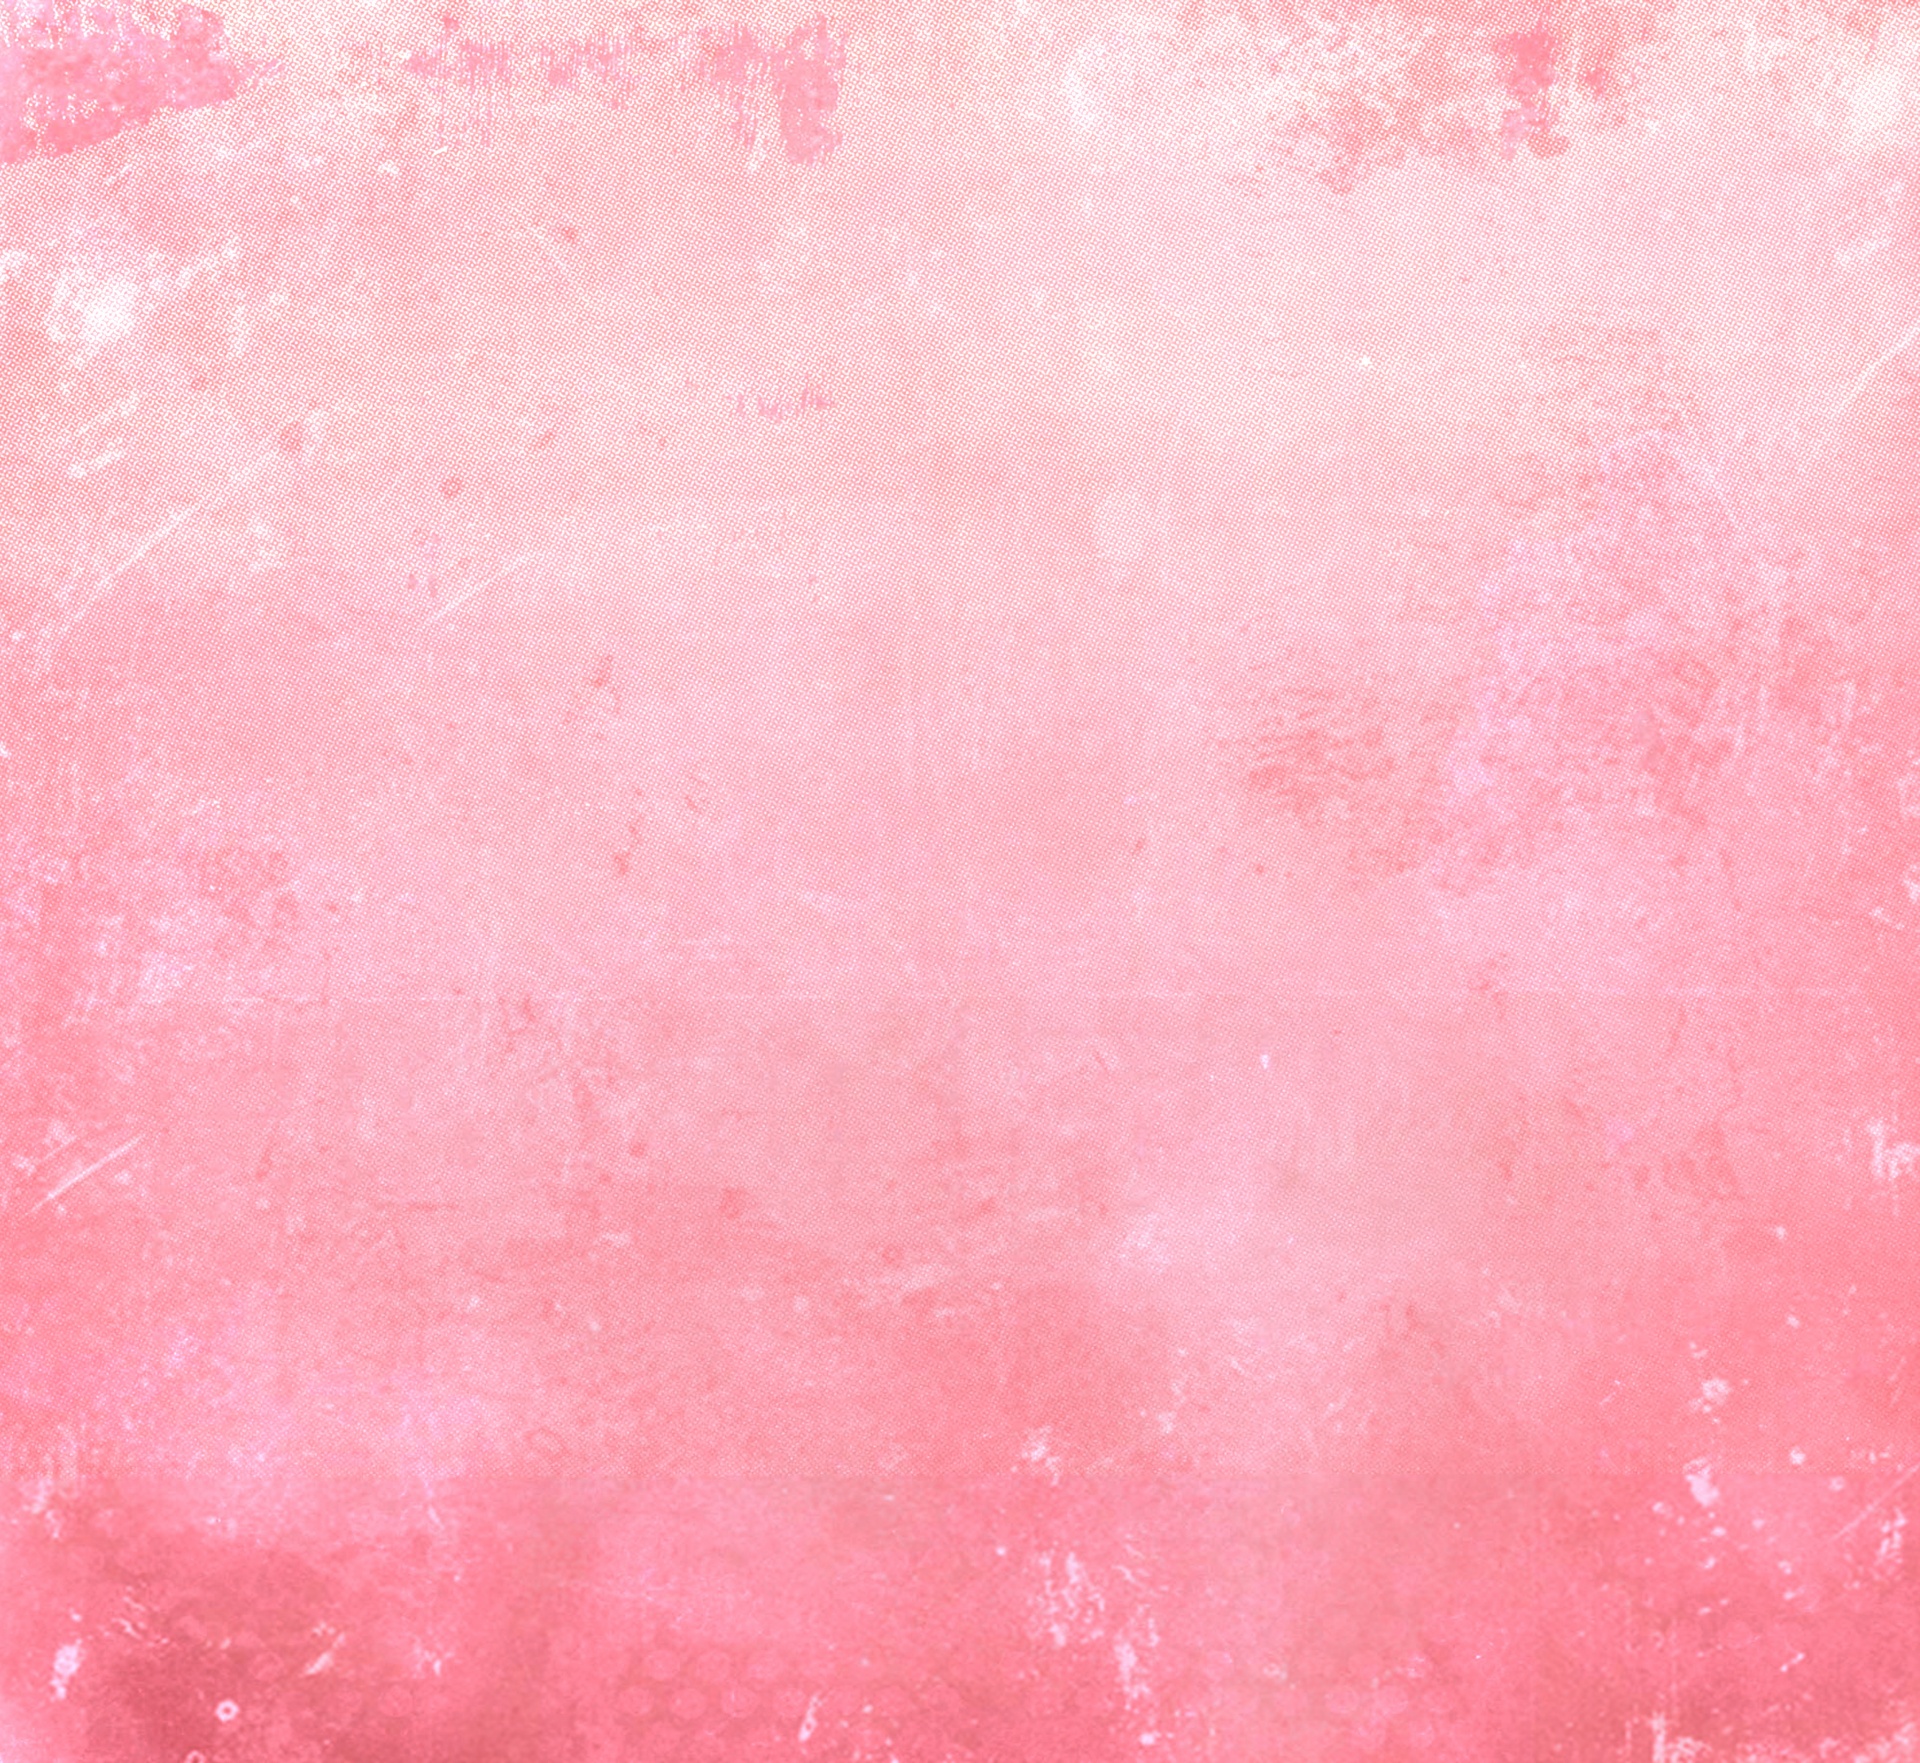 pink vector grunge background download free vector art on pink grunge wallpapers